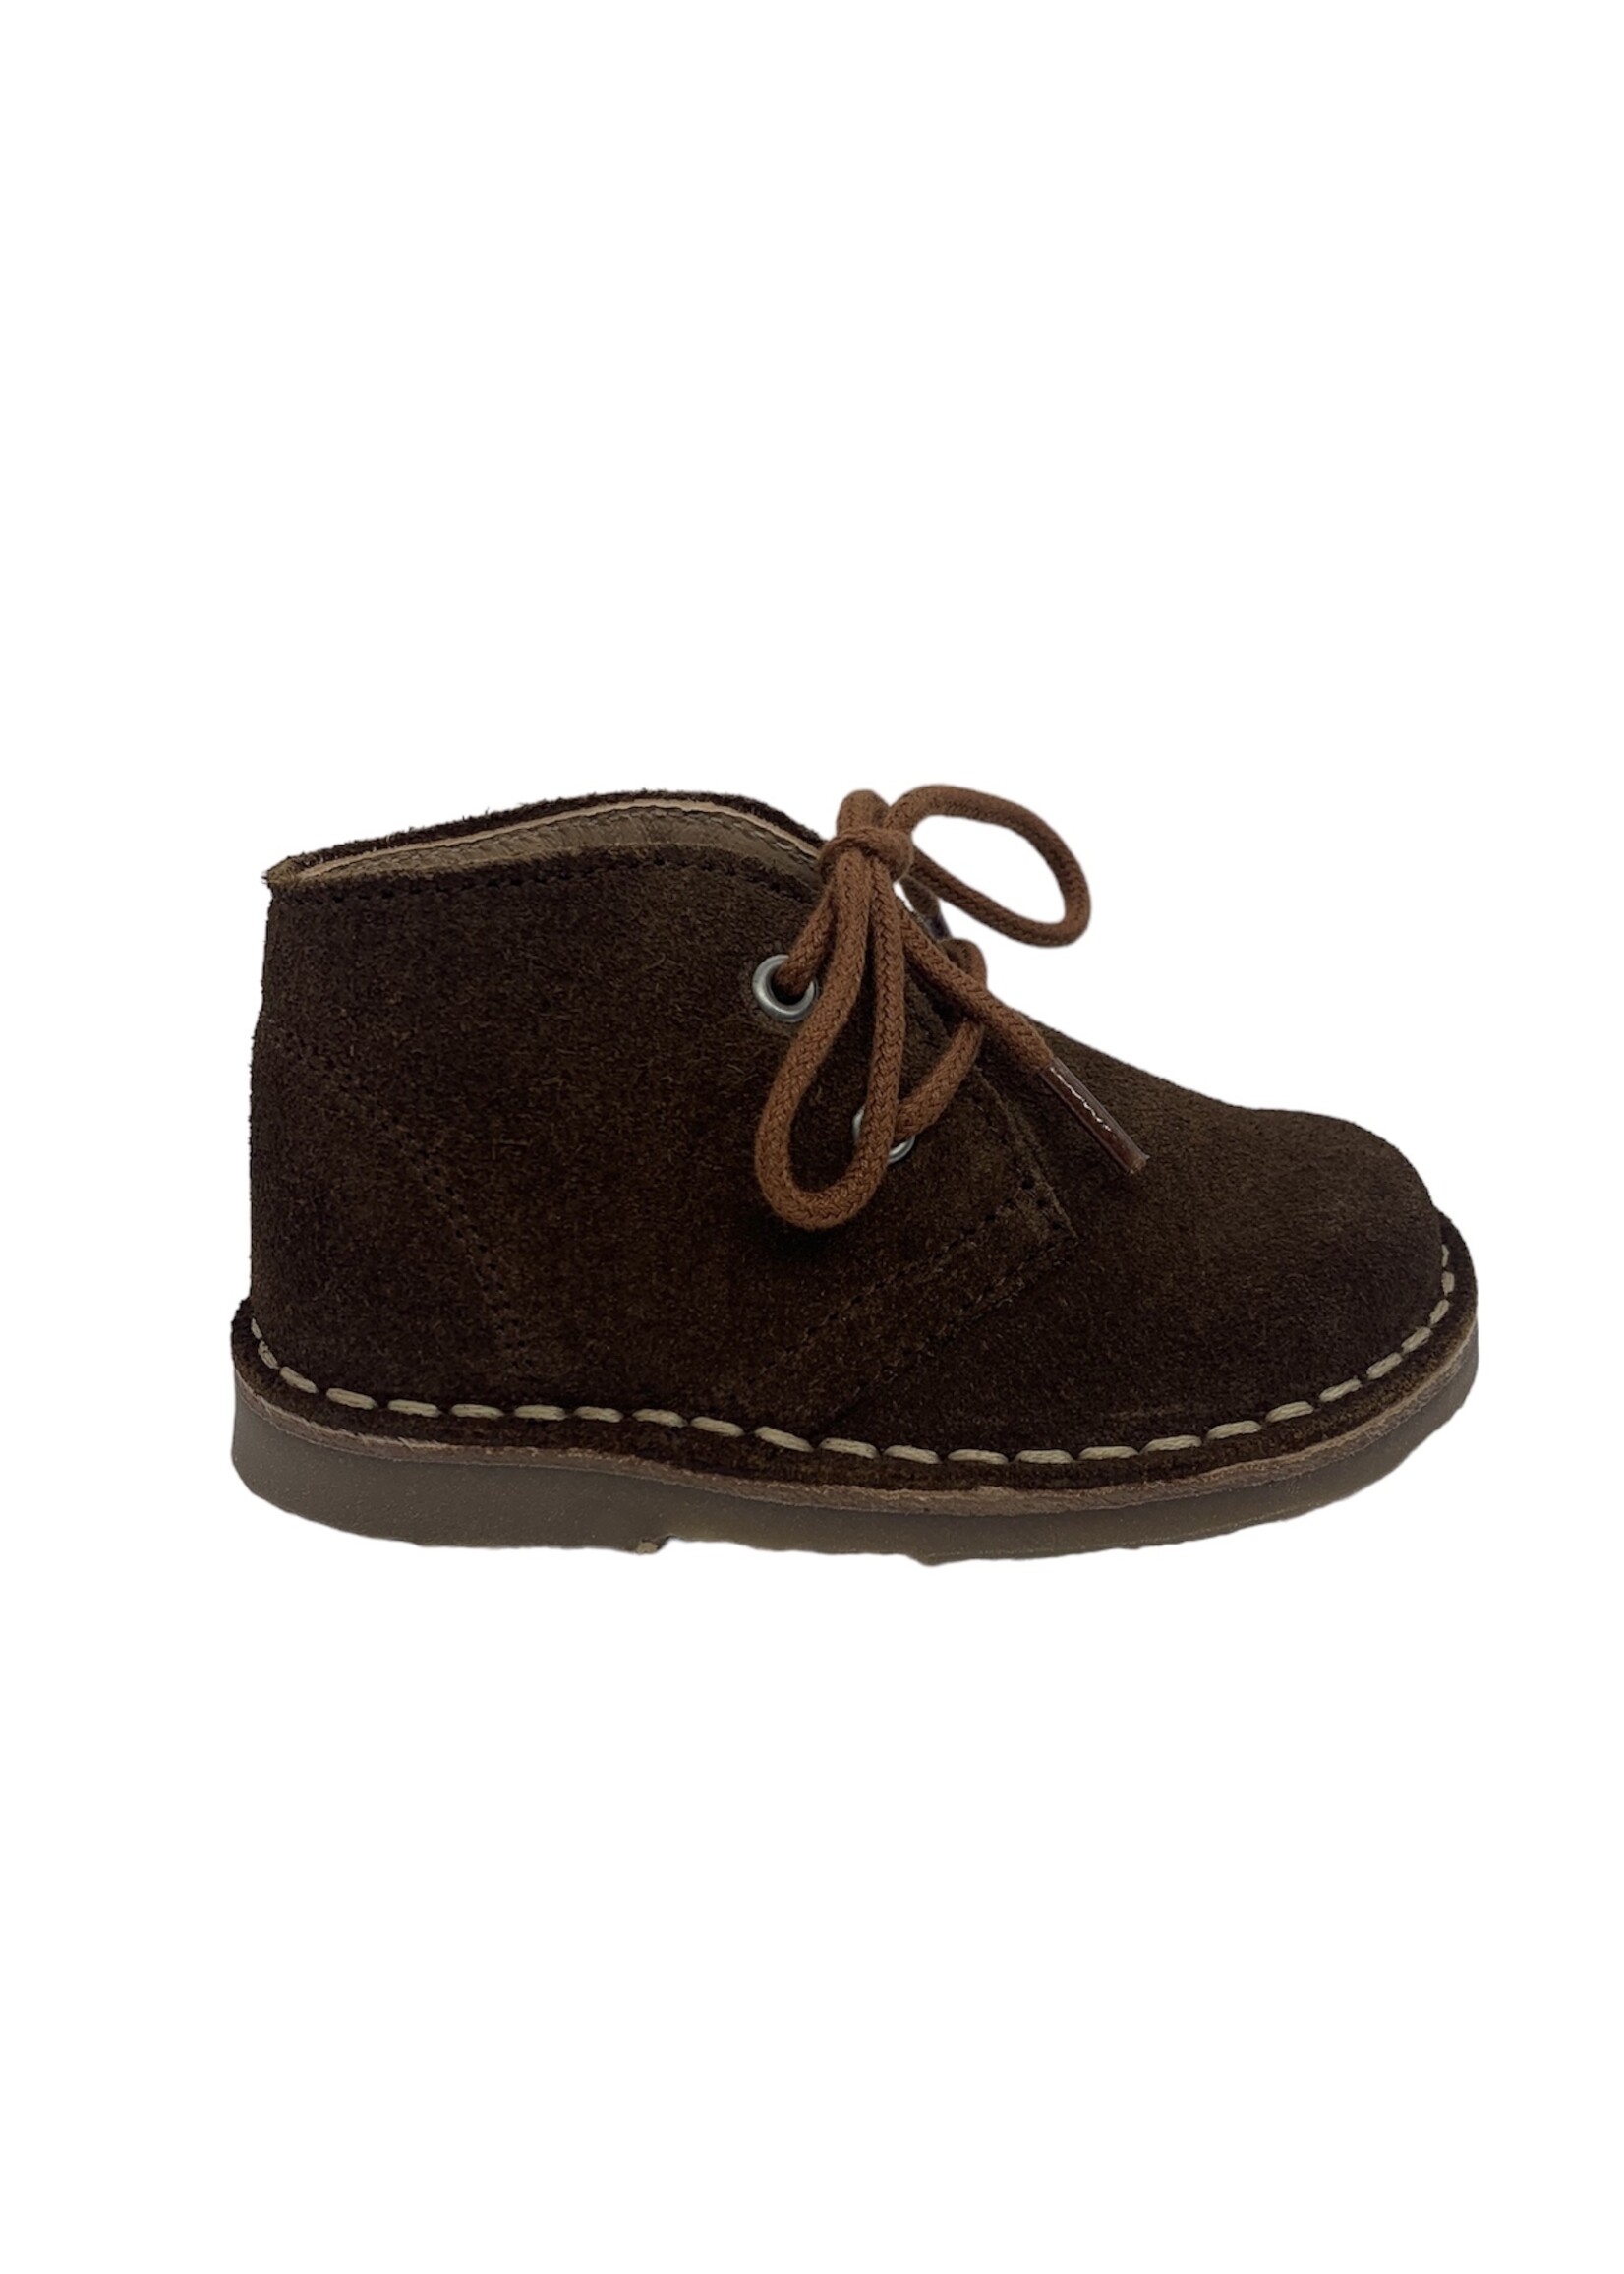 Petit Nord Petit Nord 1692 desert boot with lace teddy